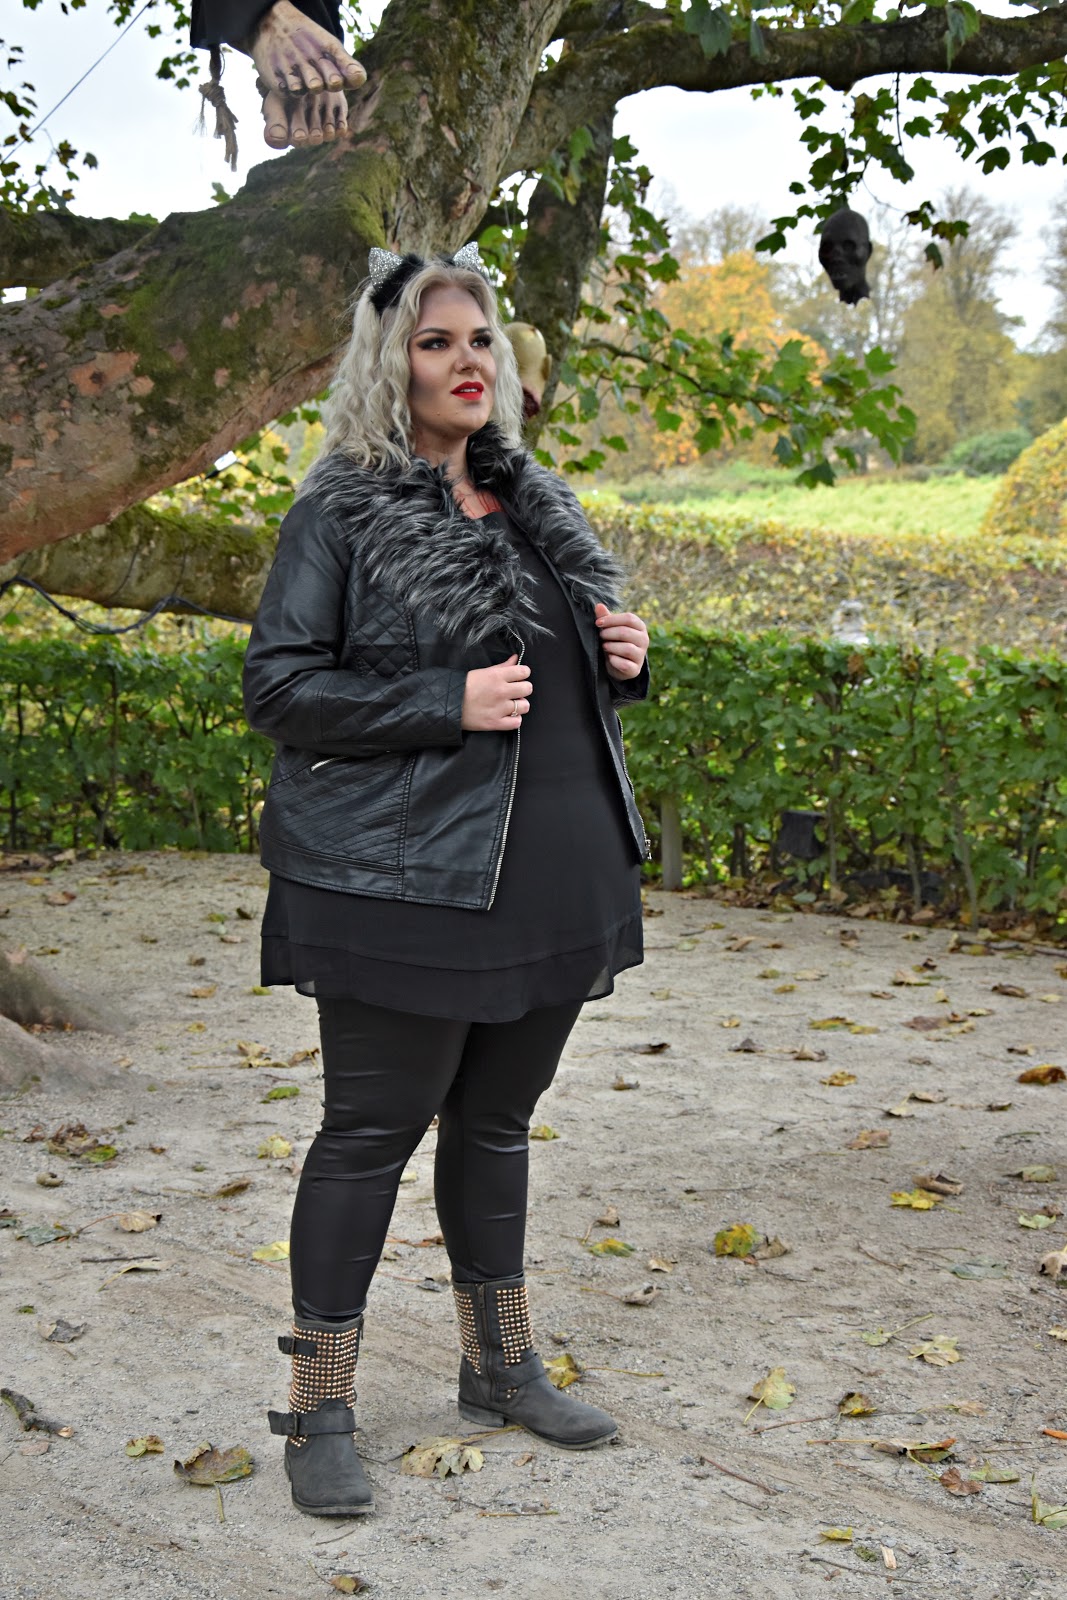 The Plus Size Faux Fur Leather Look Jacket You NEED This Autumn from Yours Clothing at The Alnwick Garden